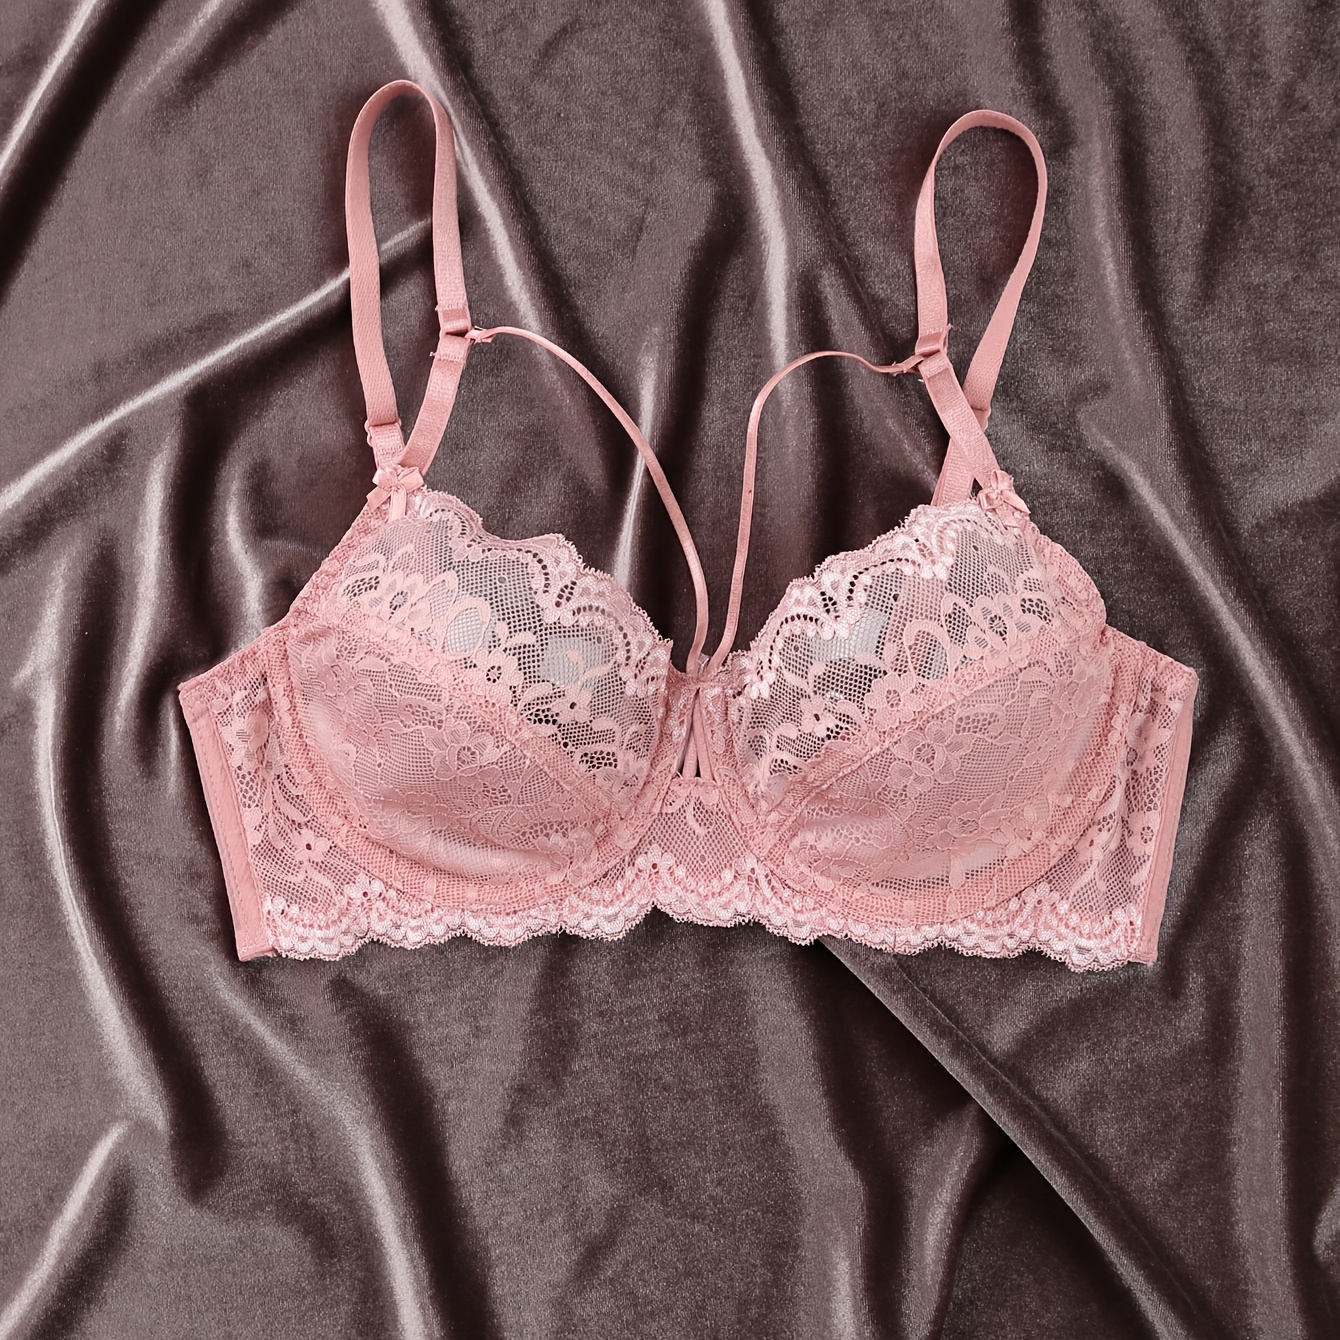 

Floral Lace Thin Bra, Sexy Cut-out Strappy Sheer Bra, Women's Lingerie & Underwear